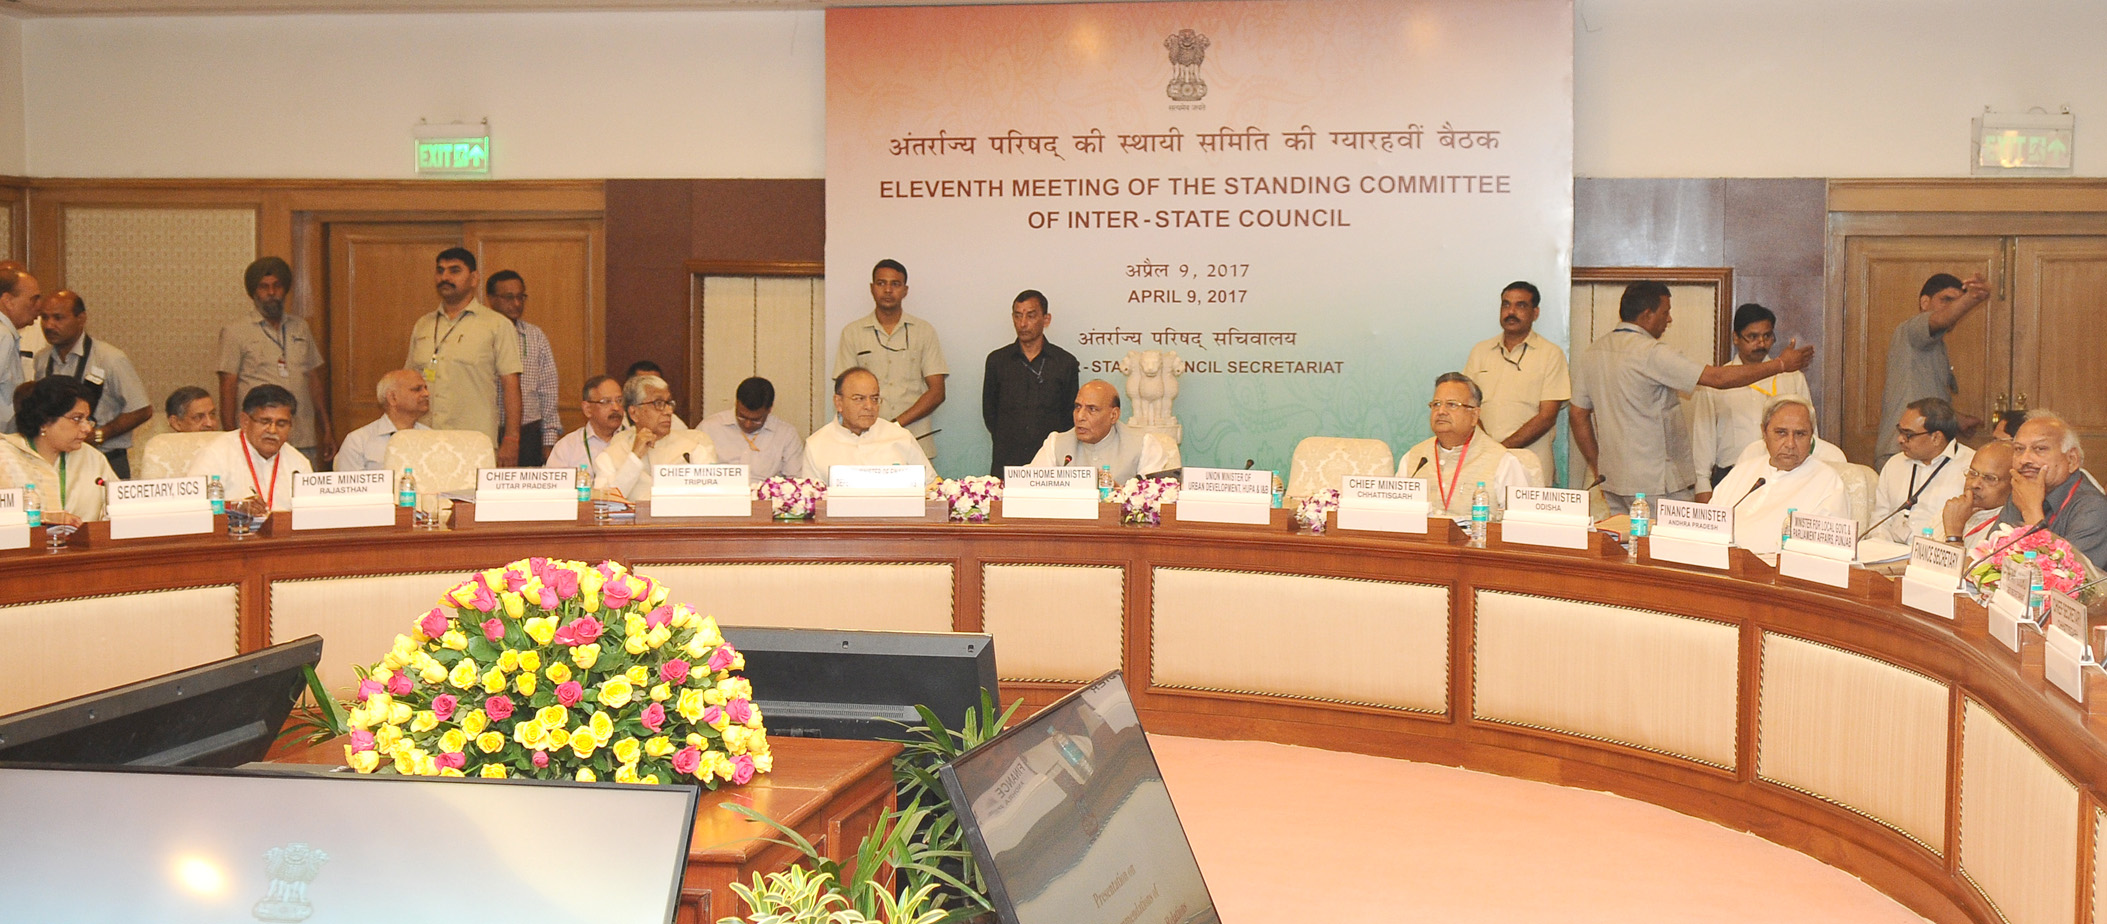 The Union Home Minister, Shri Rajnath Singh Union Home Minister Shri Rajnath Singh chairing the 11th Standing Committee meeting of the Inter-State Council, in New Delhi on April 09, 2017. 	The Union Minister for Finance, Corporate Affairs and Defence, Shri Arun Jaitley is also seen.